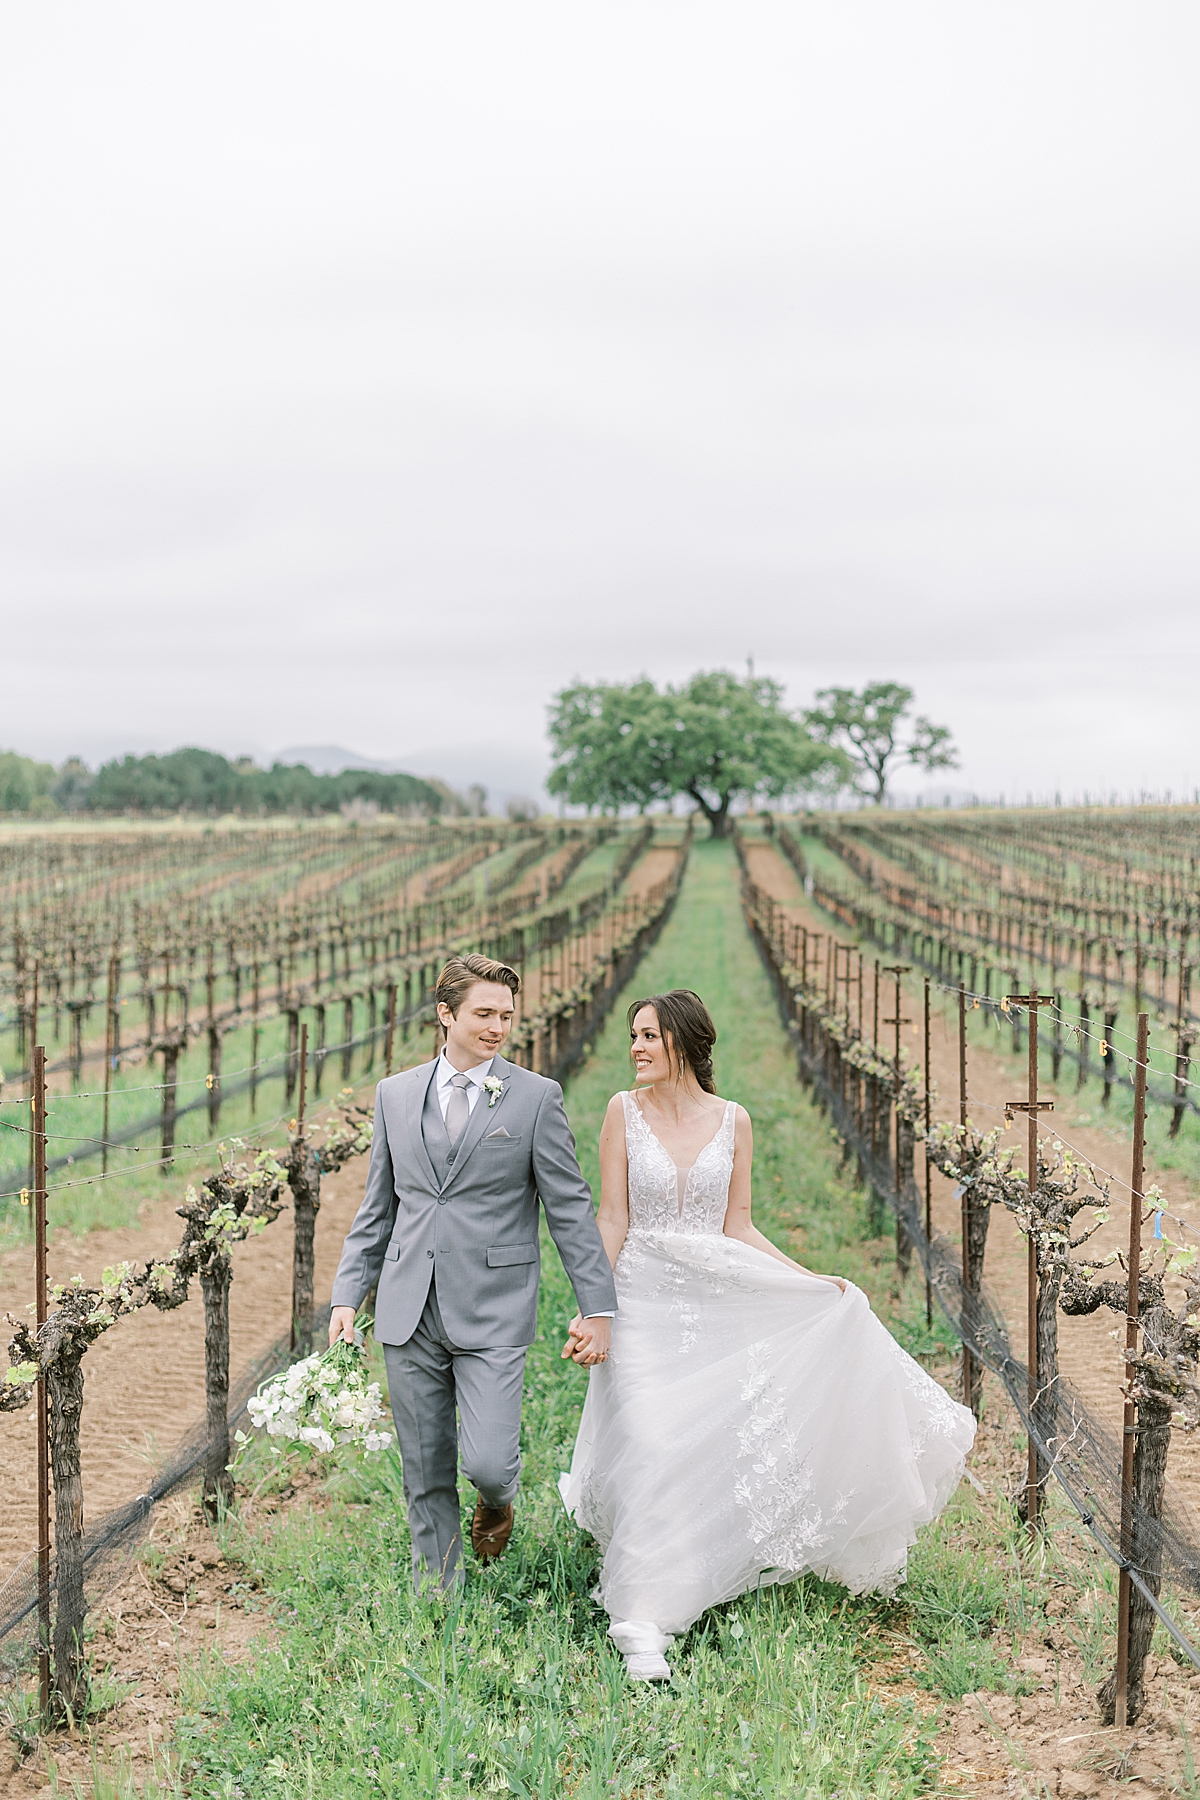 The couple holding hands while walking through the vineyard at their Southern California Winery Wedding at Sunstone Villa in Santa Ynez, California.